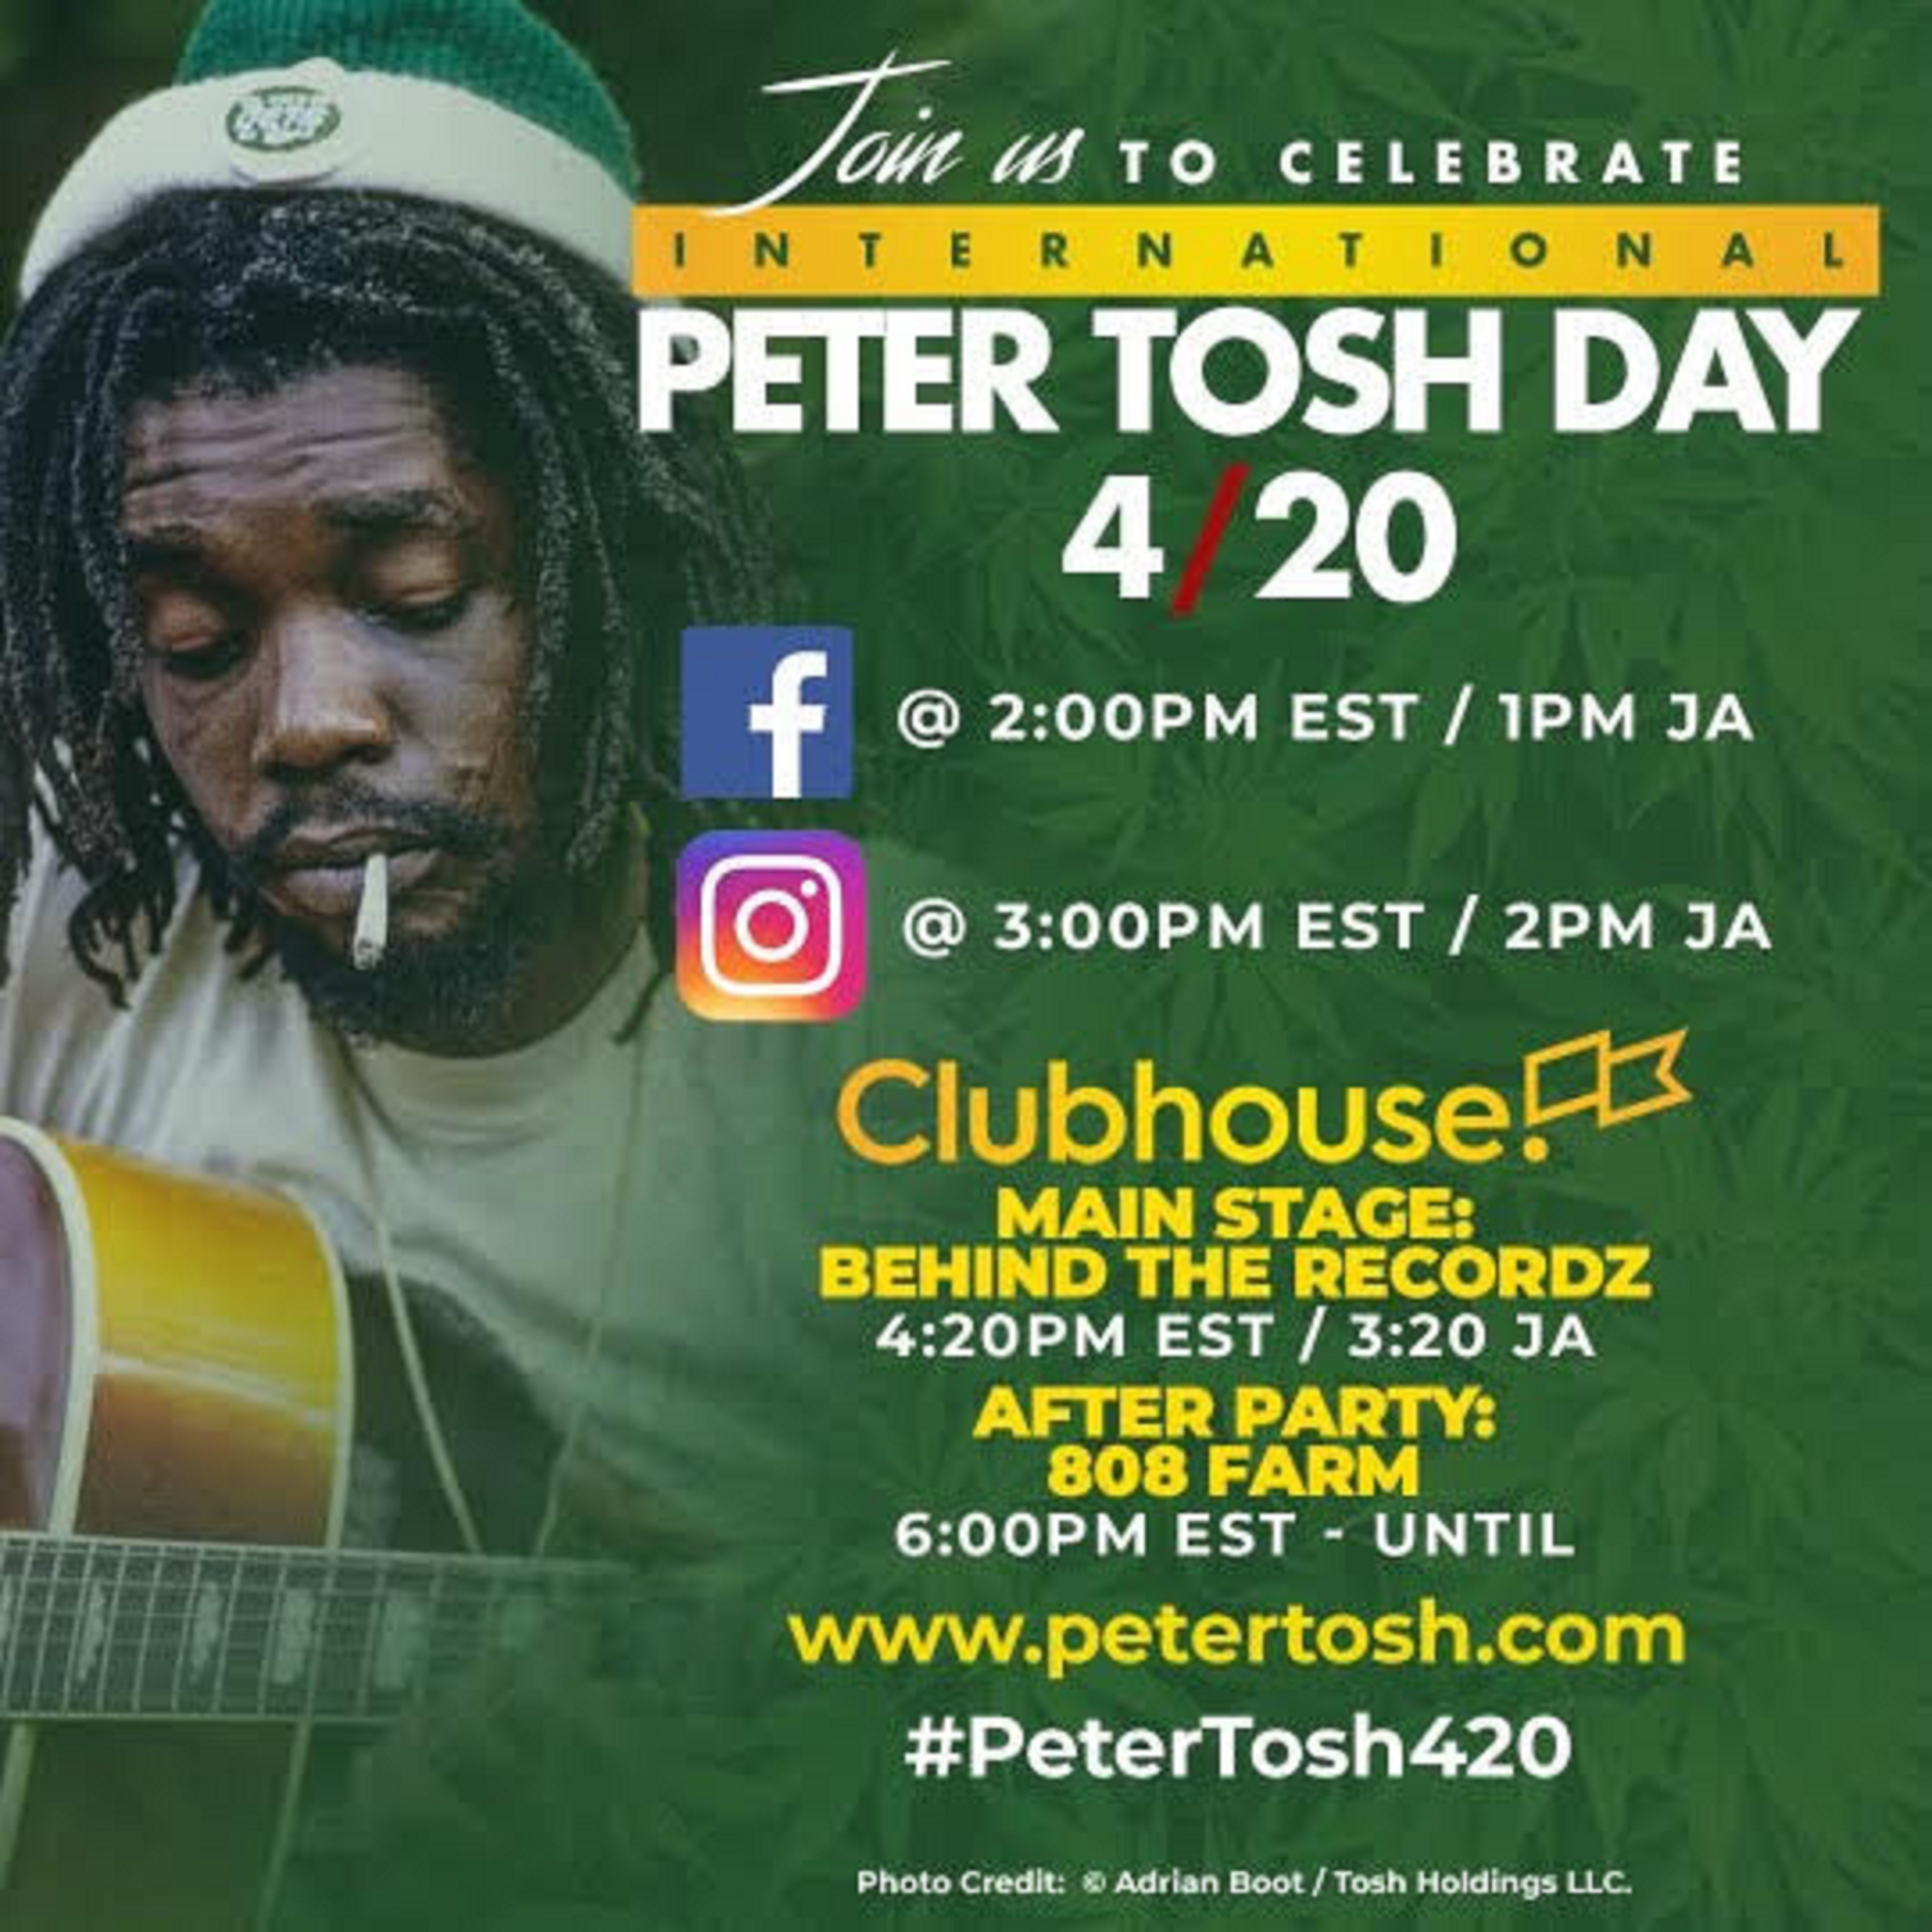 “INTERNATIONAL PETER TOSH DAY” CELEBRATES FIGHT FOR GLOBAL CANNABIS LEGALIZATION